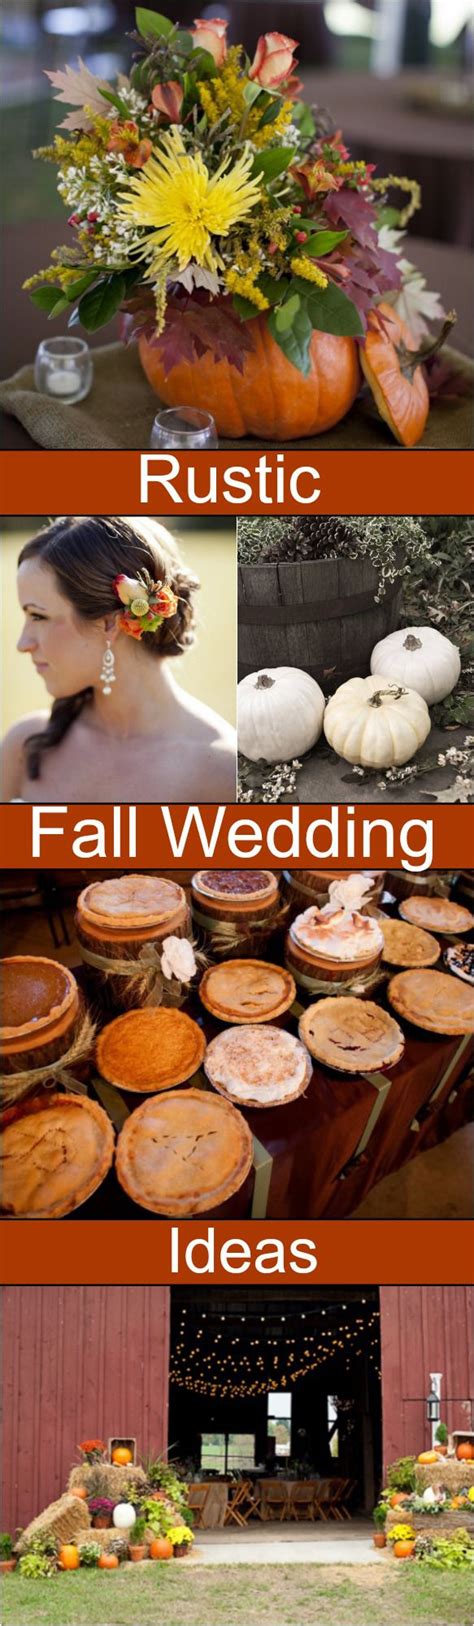 The ultimate wedding planning guide. Fall Wedding Ideas For A Rustic Wedding - Rustic Wedding Chic